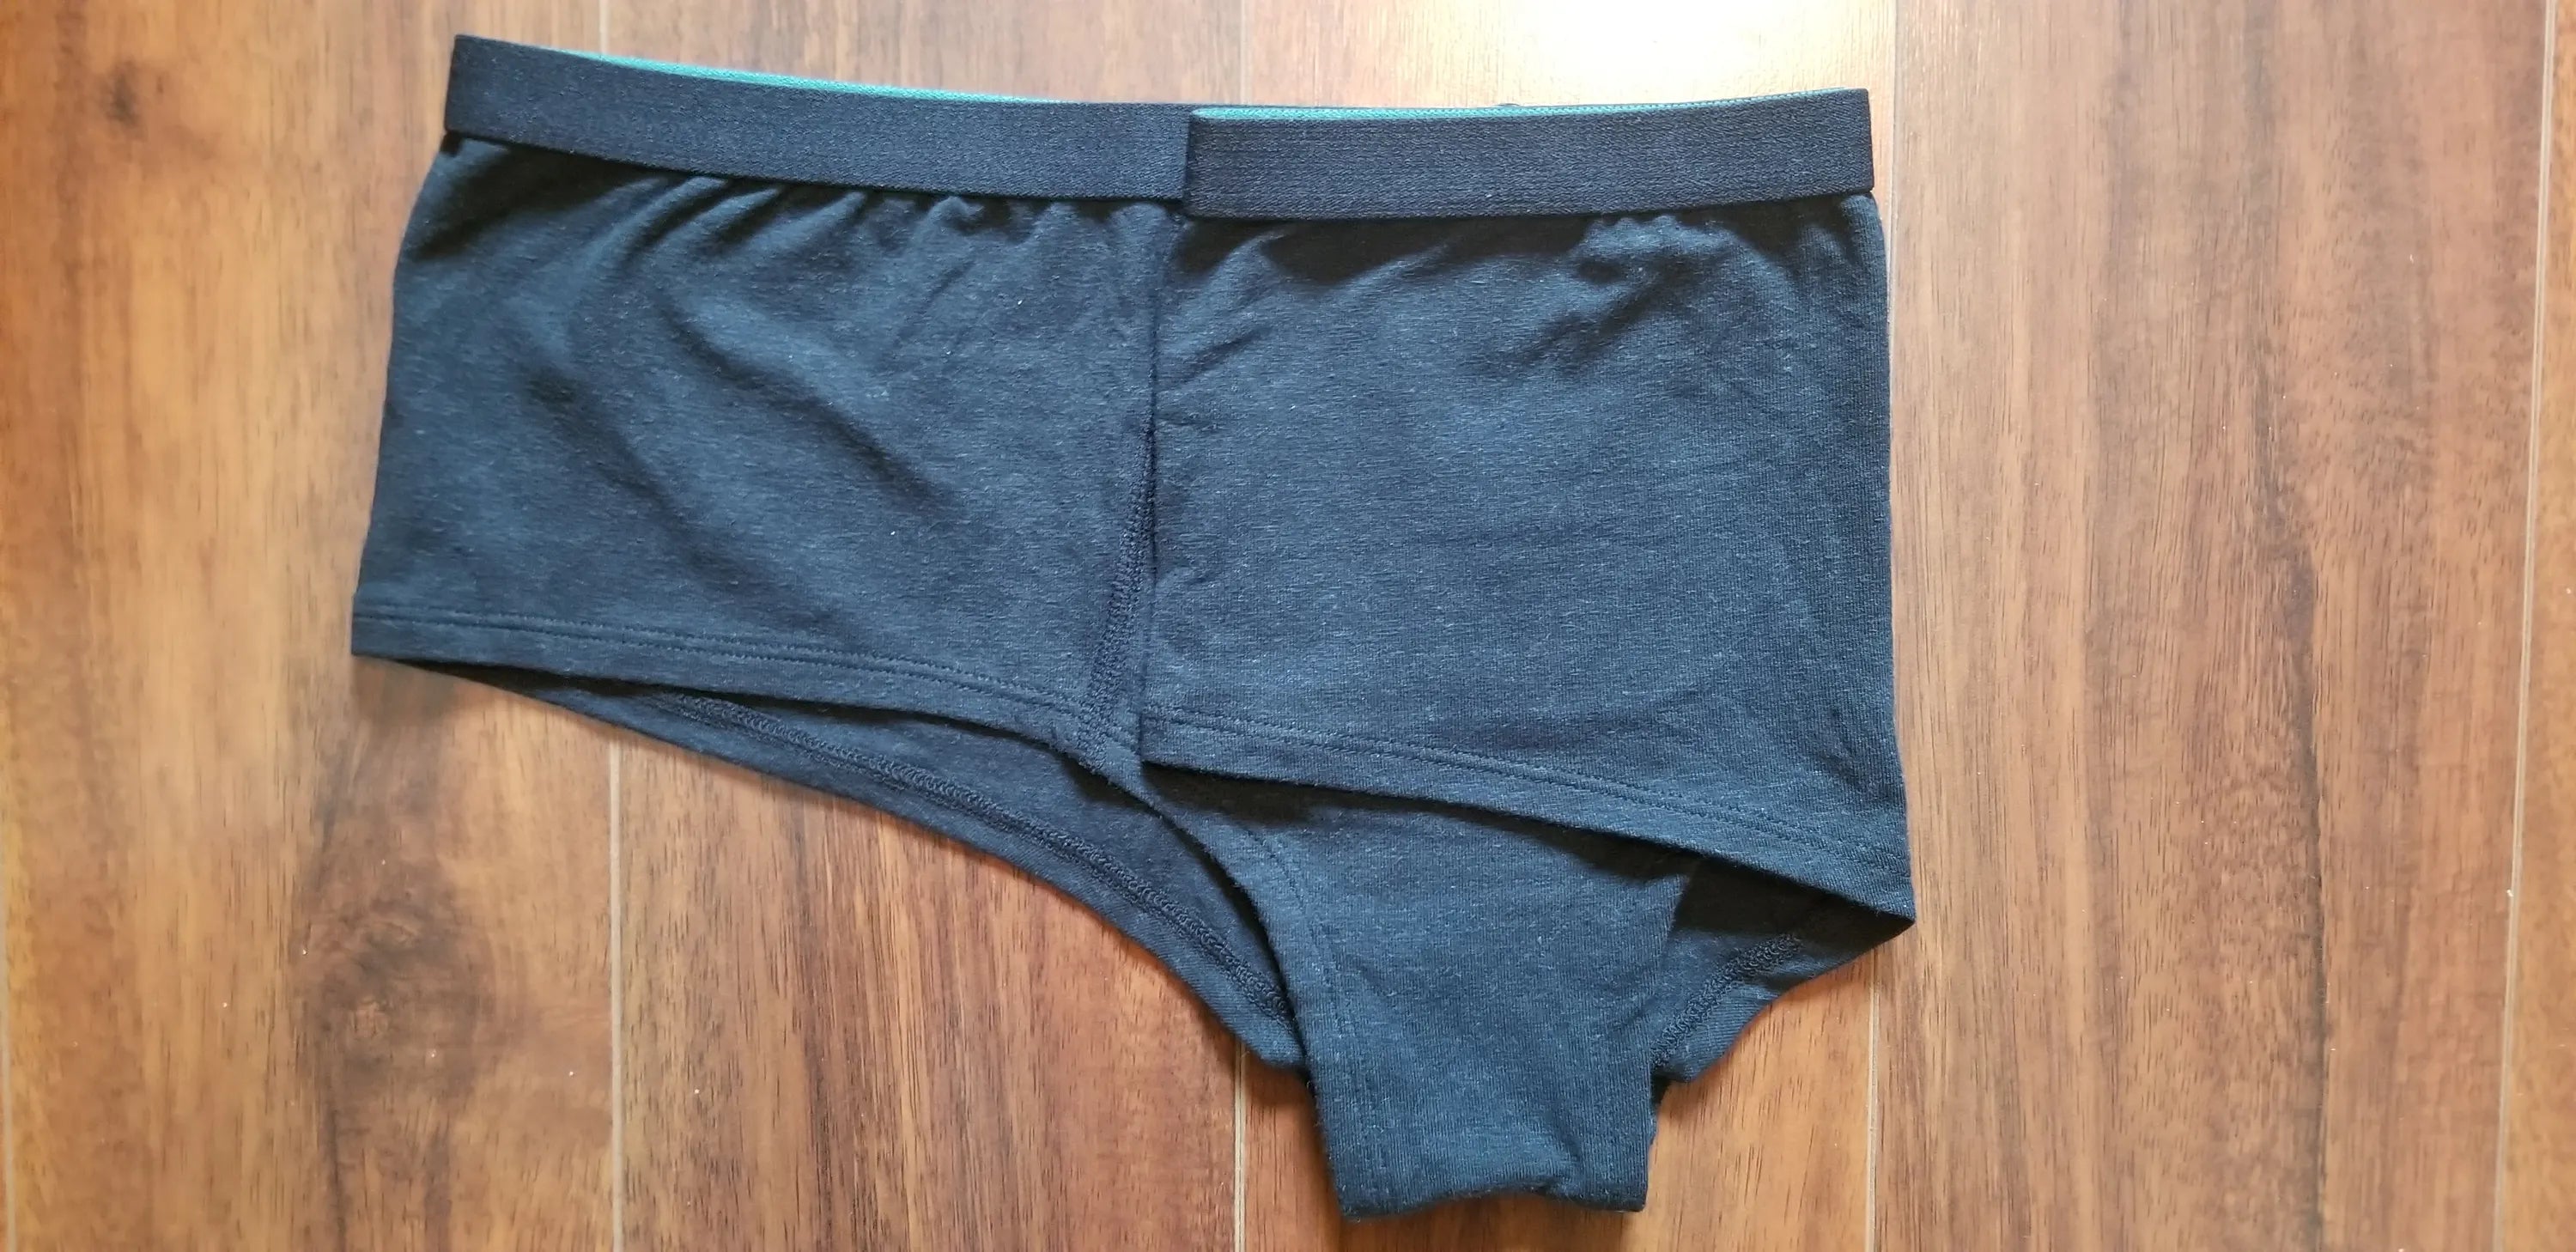 5 Simple Tips on How to Fold Underwear and Why You Should Do it - Blog